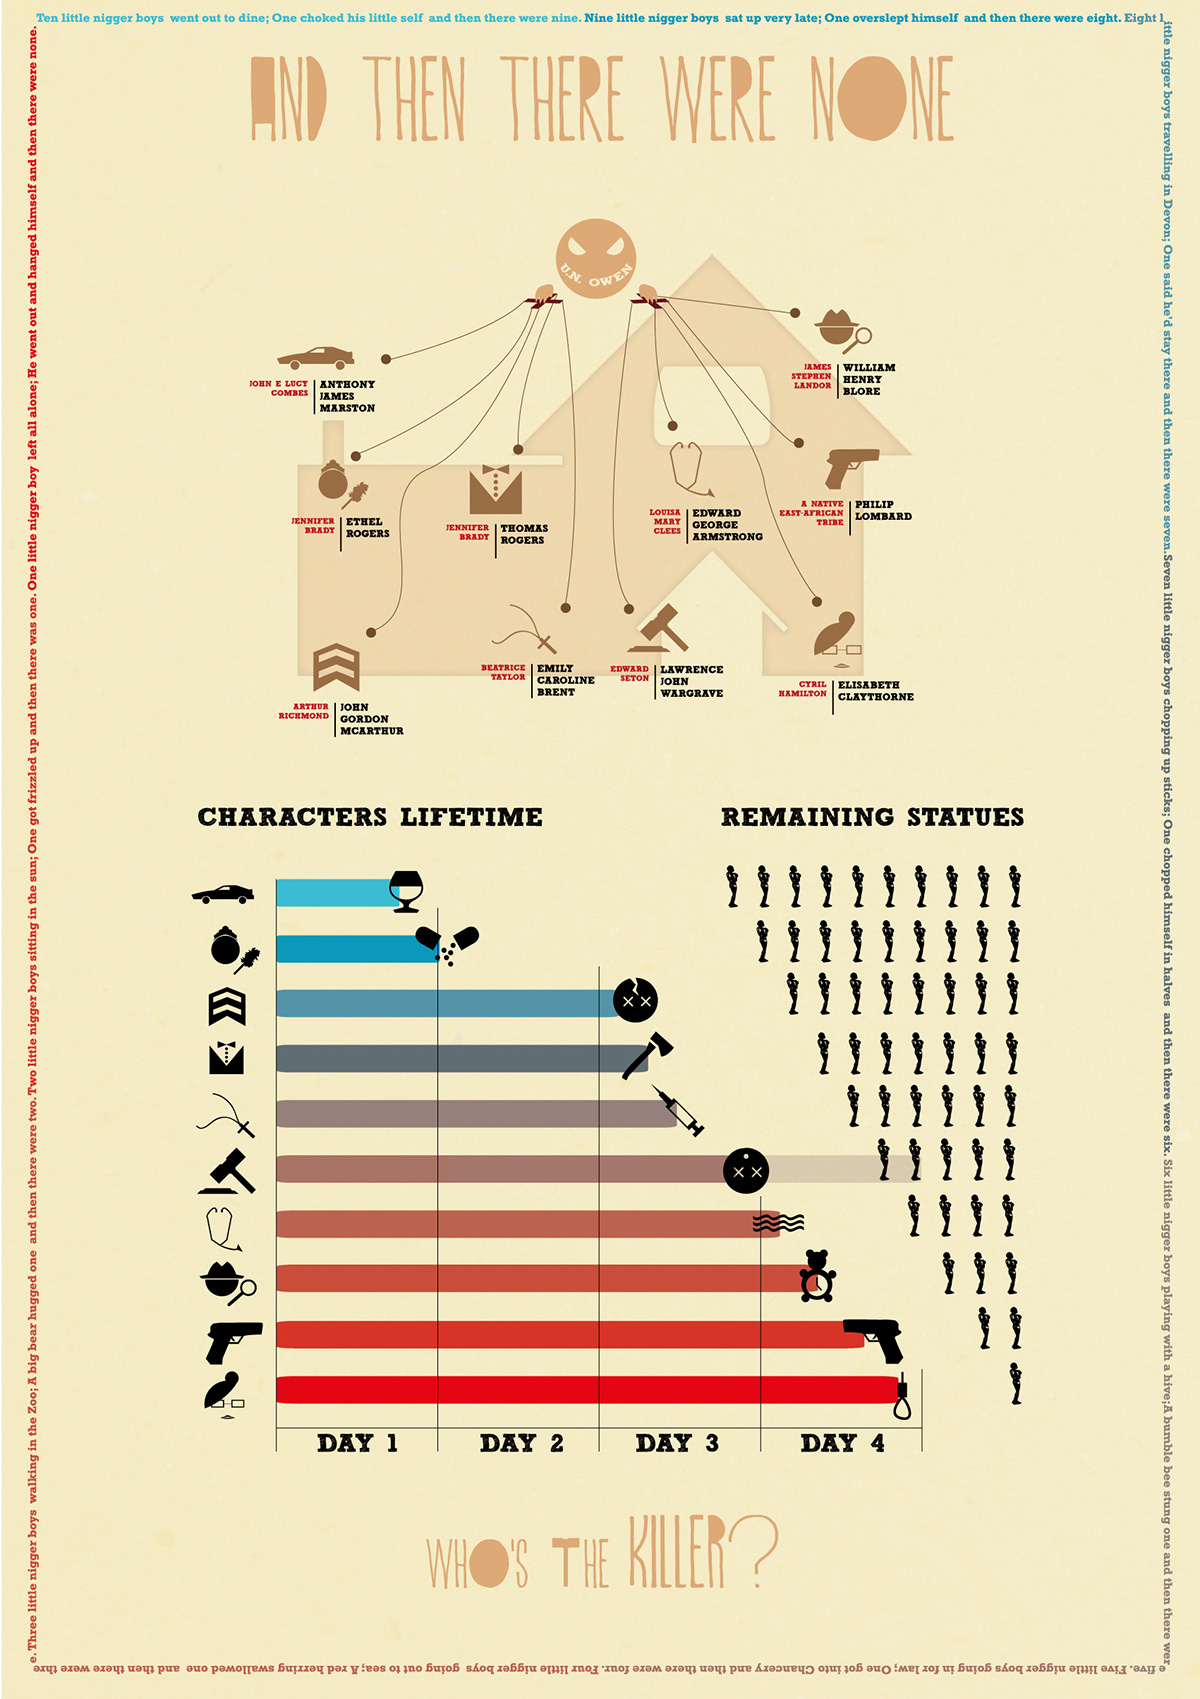 and then there were none information design infographic dieci piccoli Indiani